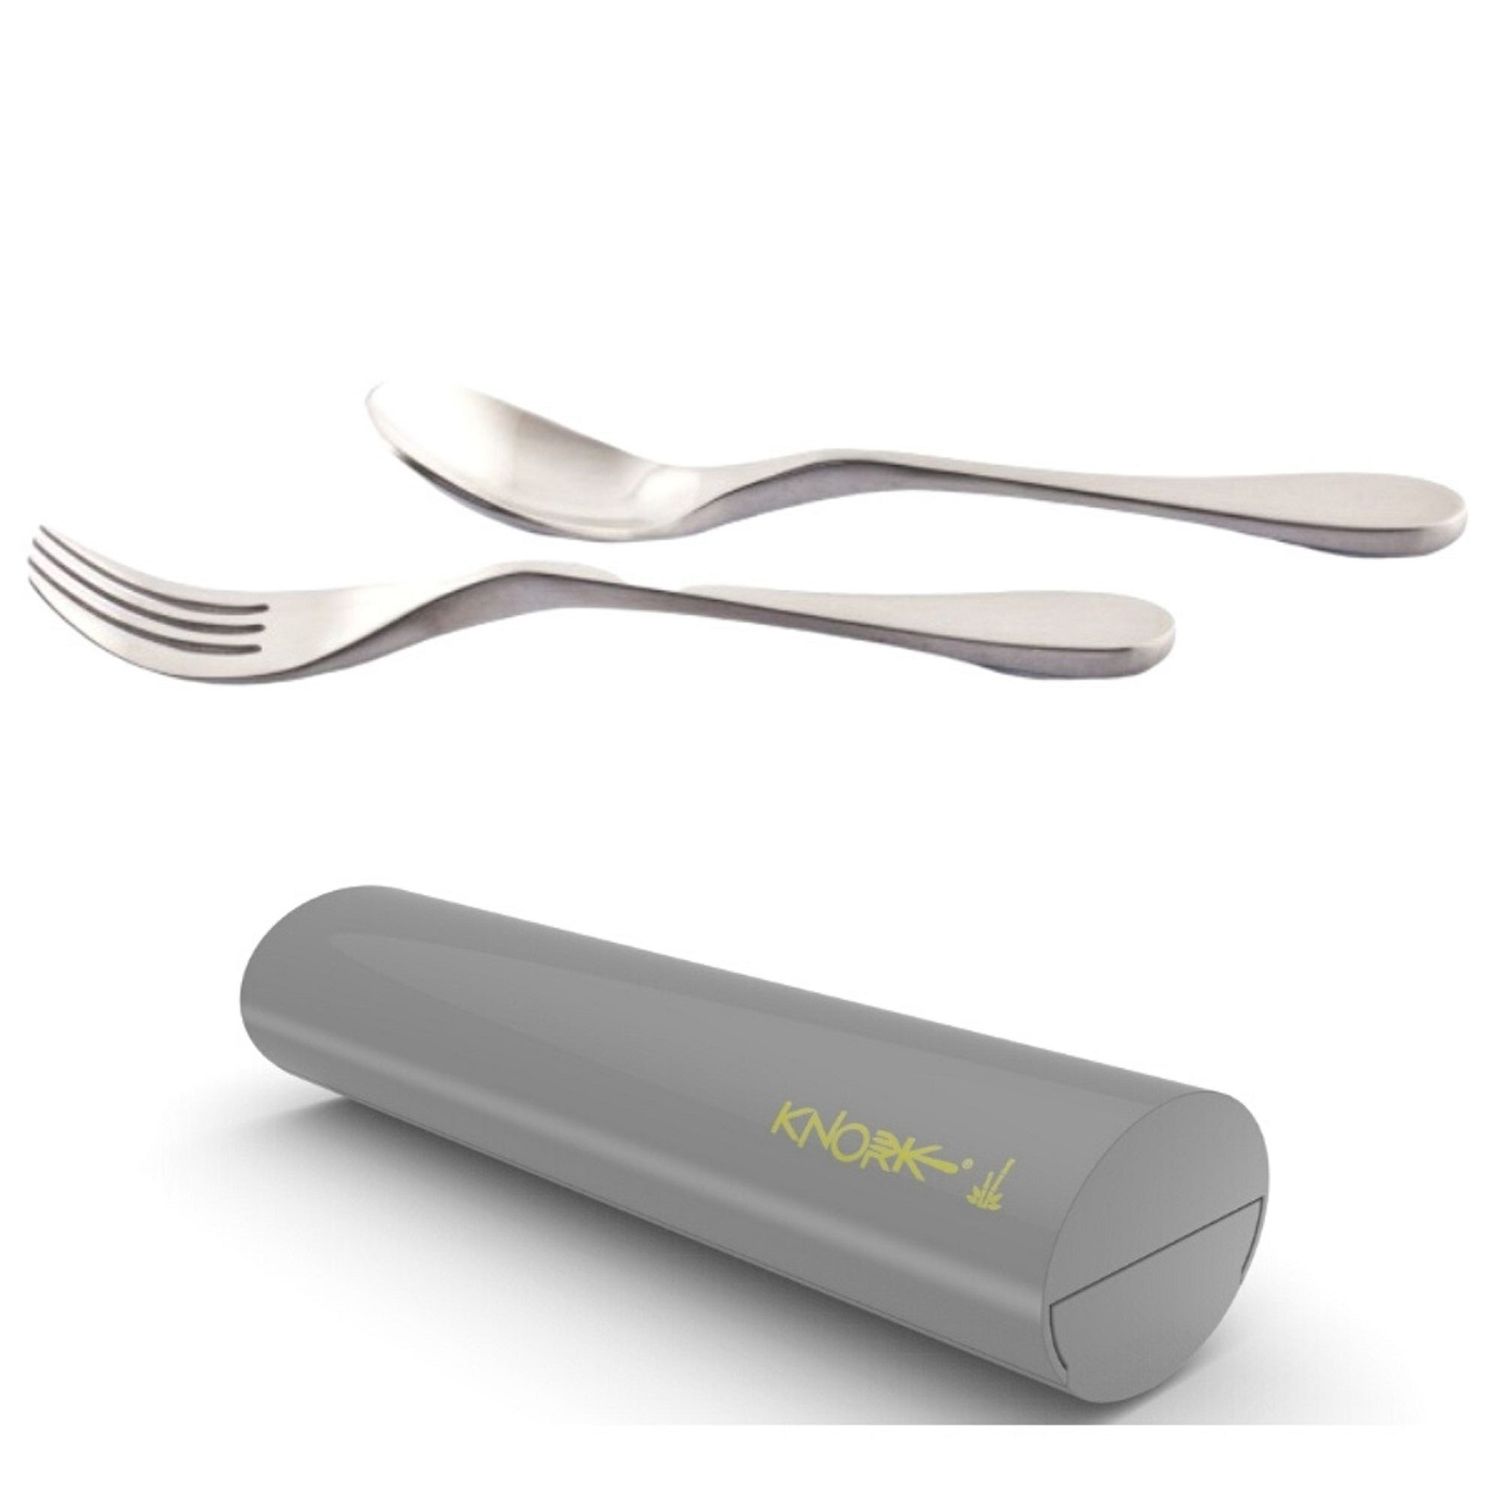 Portable Cutlery Set, Travel Cutlery Set, 3 Piece Cutlery With Cover,  Stainless Steel Cutlery, Custom Name Reusable Cutlery Set 